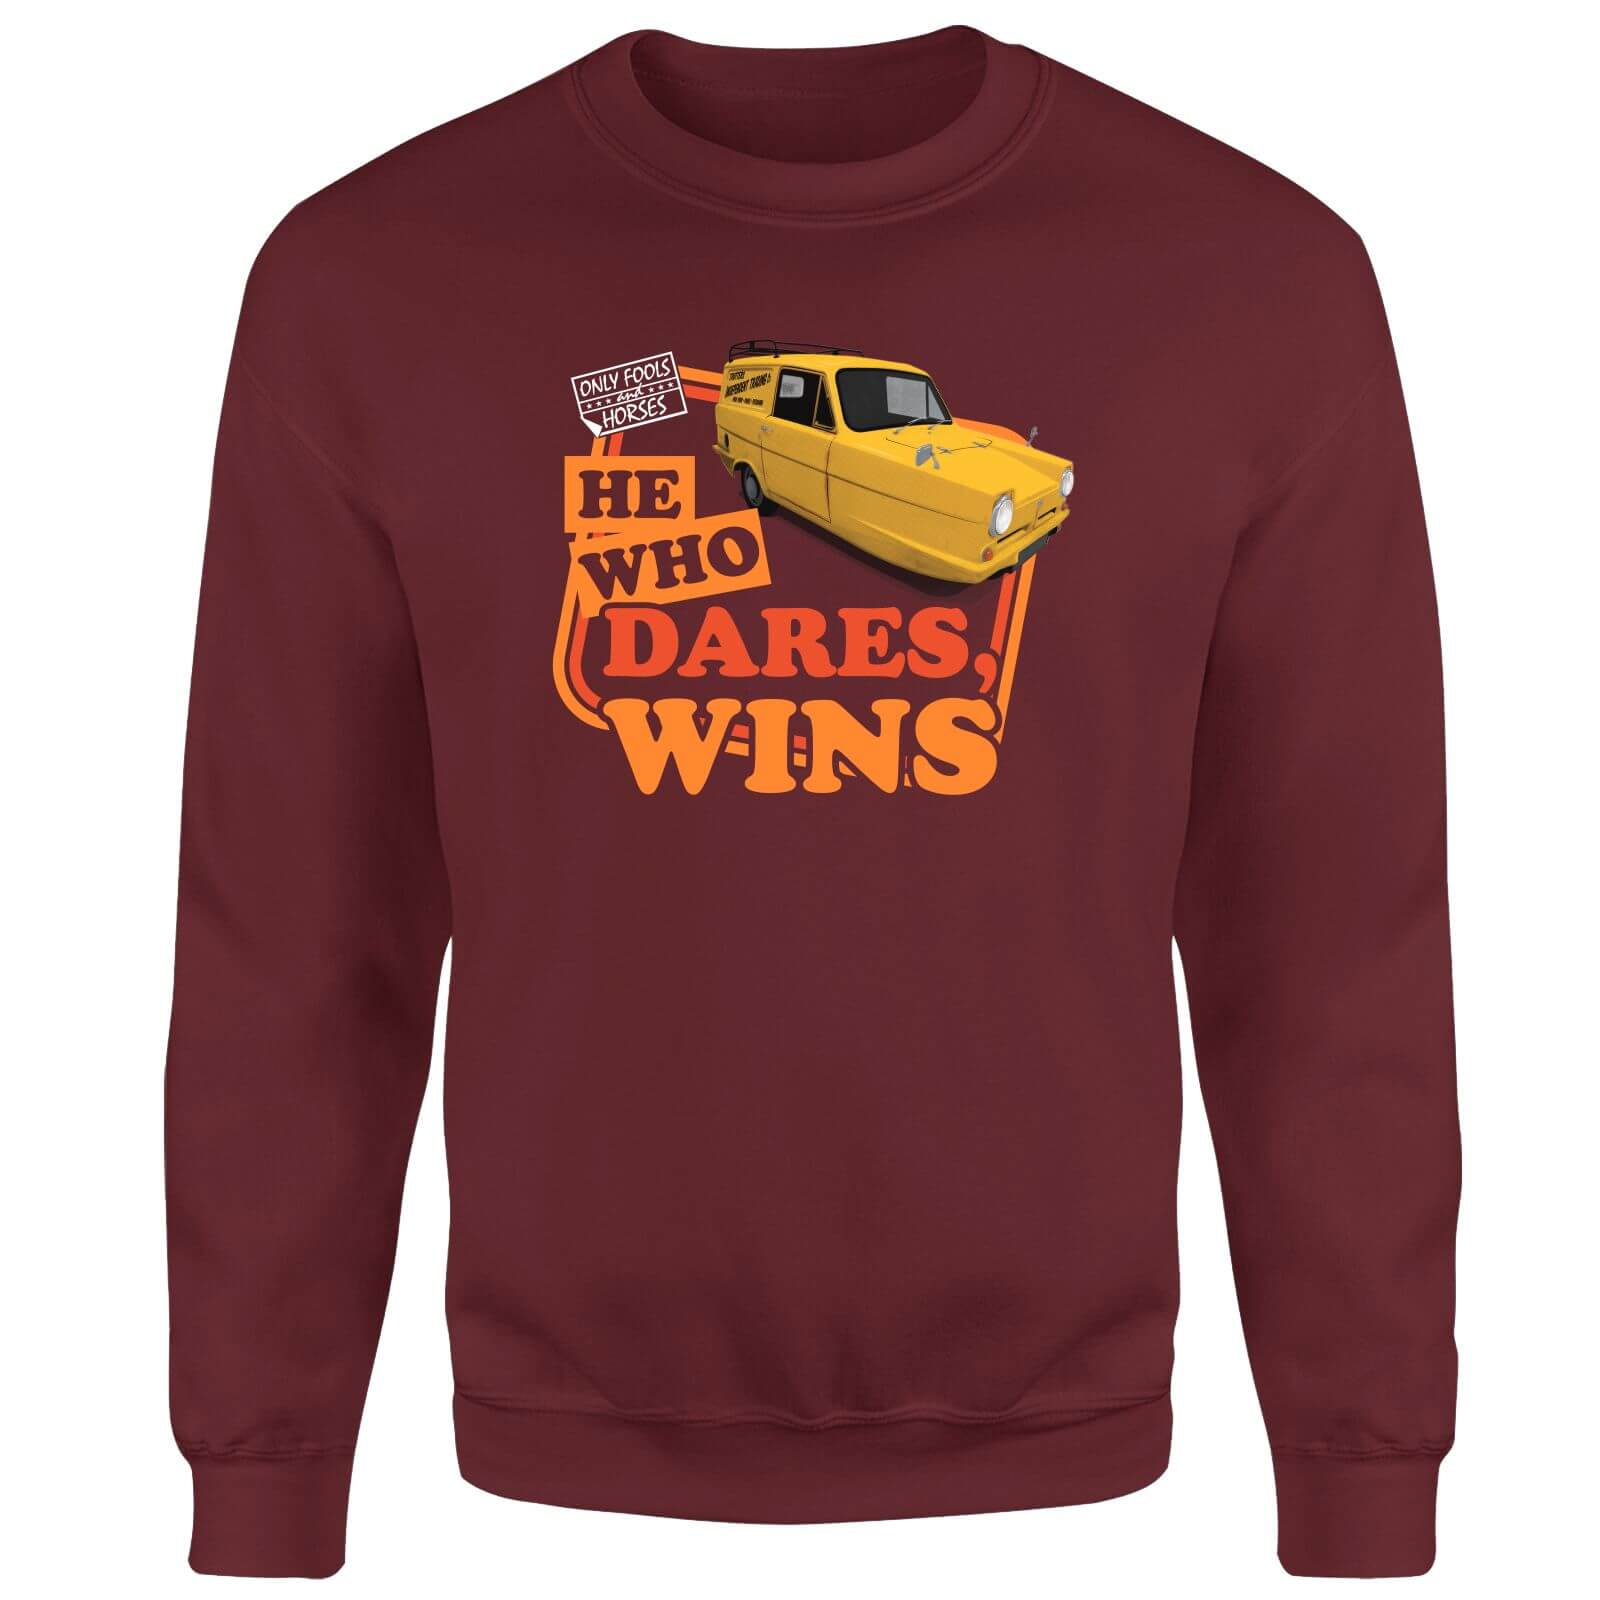 Only Fools And Horses He Who Dares, Wins Sweatshirt - Burgundy - S